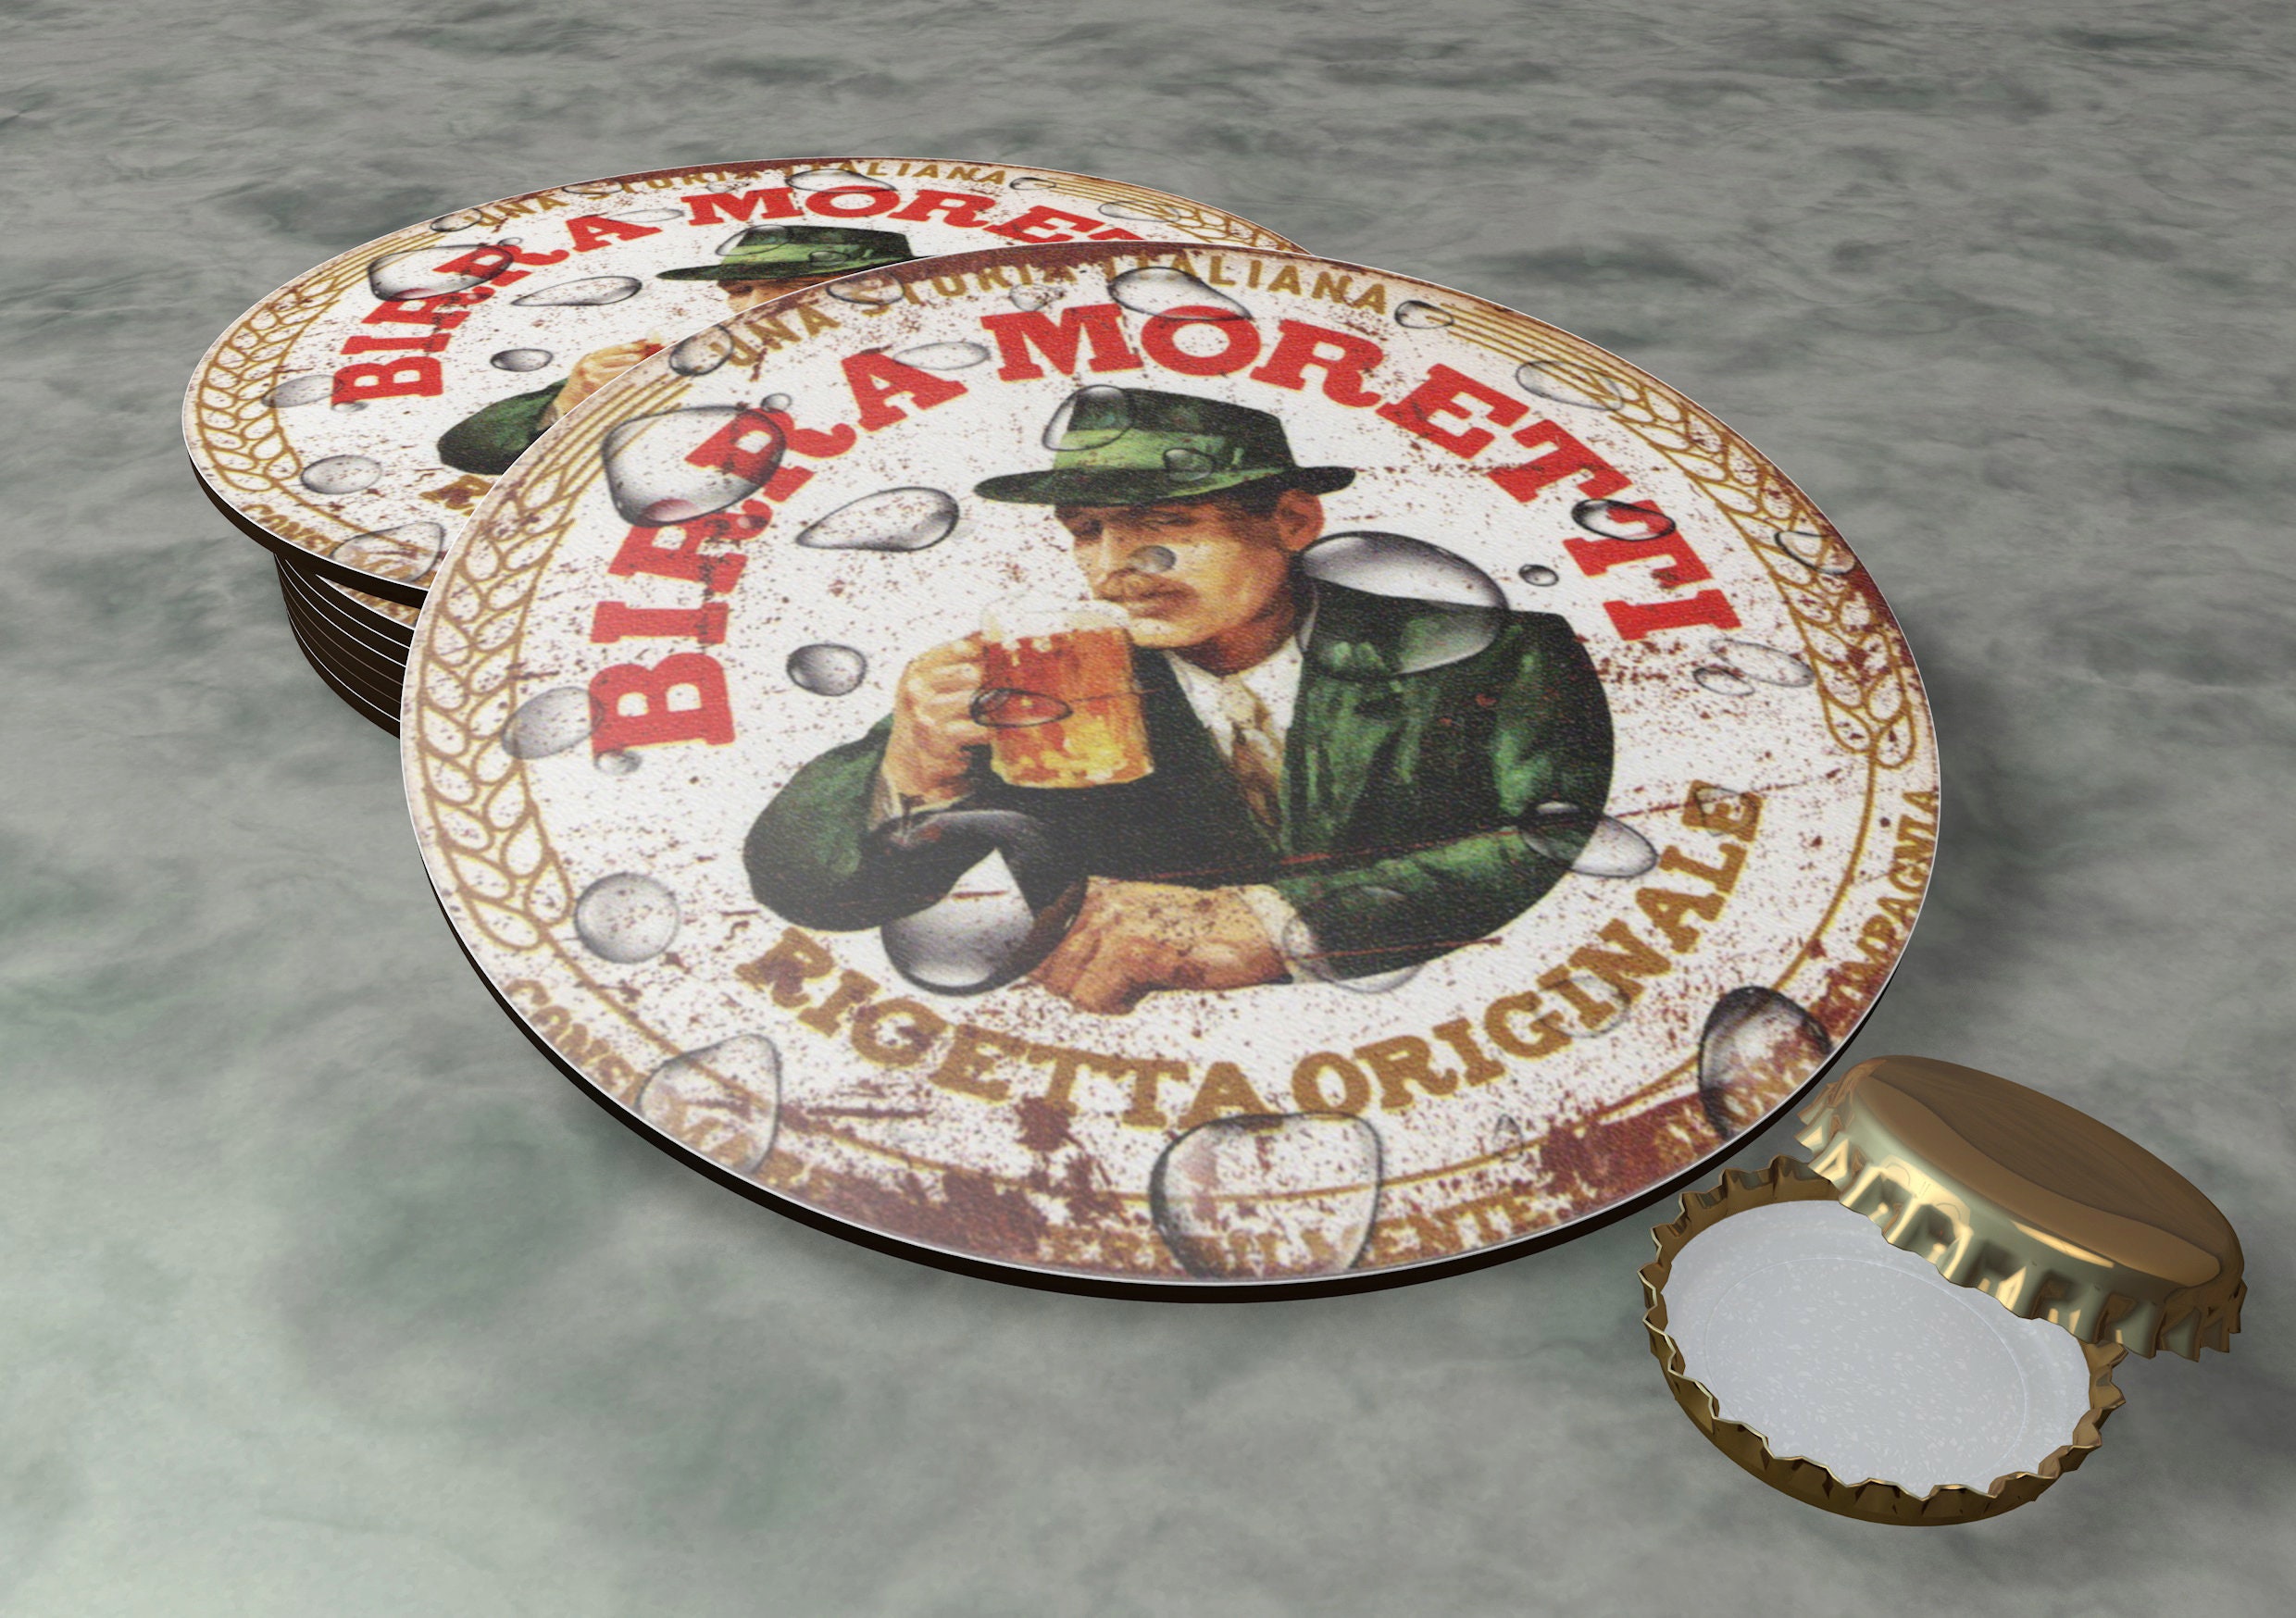 Good for Blade owners 4 Birra Moretti Round Slate Coasters 10cm x 10cm 